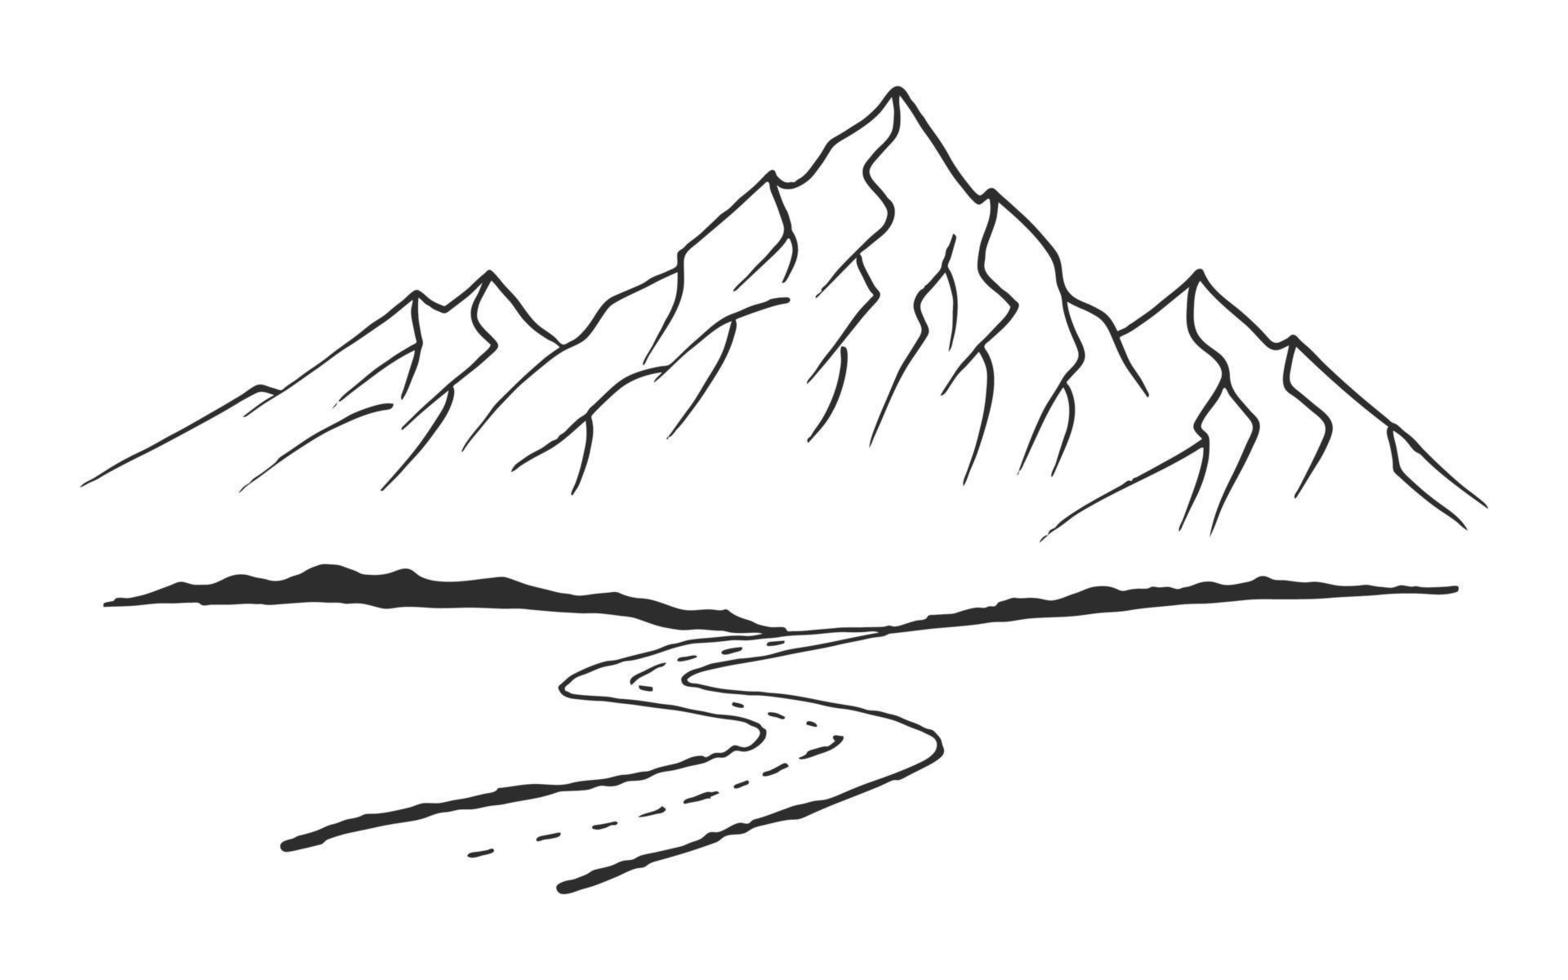 Road to mountains. Landscape black on white background. Hand drawn rocky peaks in sketch style. Vector illustration